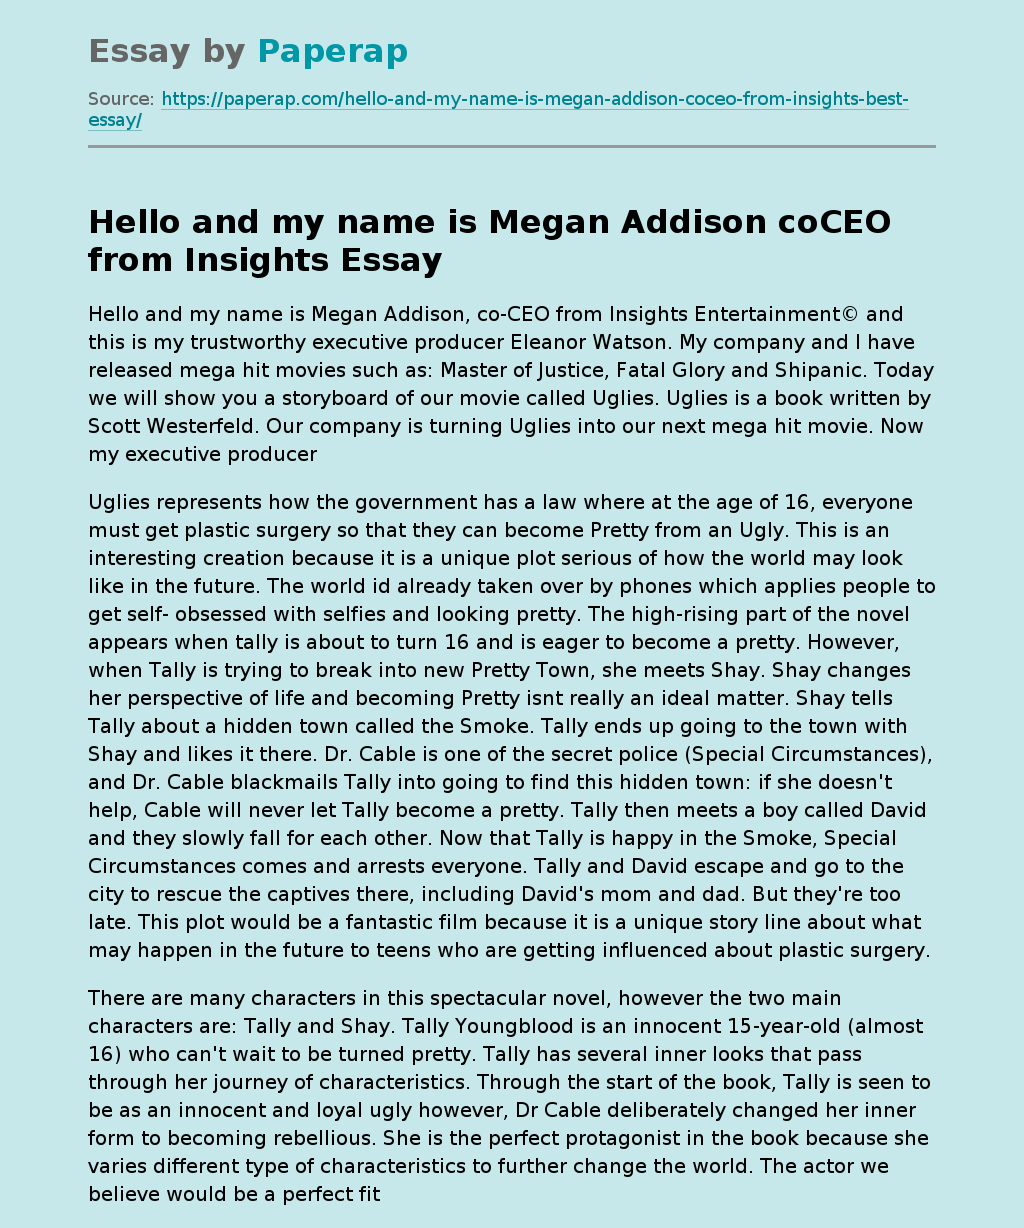 Hello and my name is Megan Addison coCEO from Insights